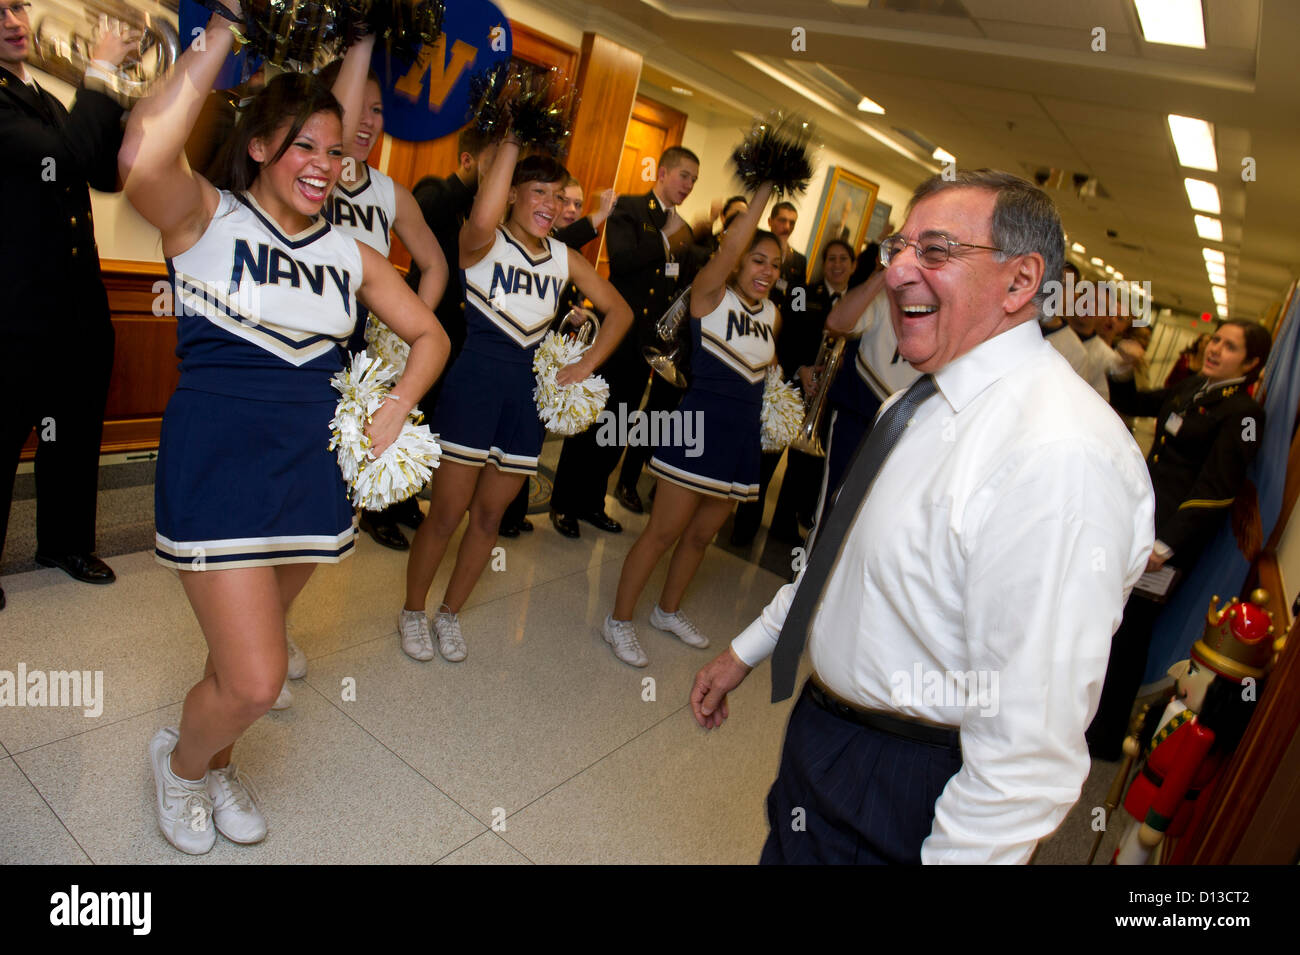 US Secretary of Defense Leon Panetta greets the US Naval Academy Midshipmen cheerleaders and band during a pep rally held in the halls of the Pentagon December 6, 2012. The 113th Army Navy football game will be held this Saturday in Philadelphia. Stock Photo